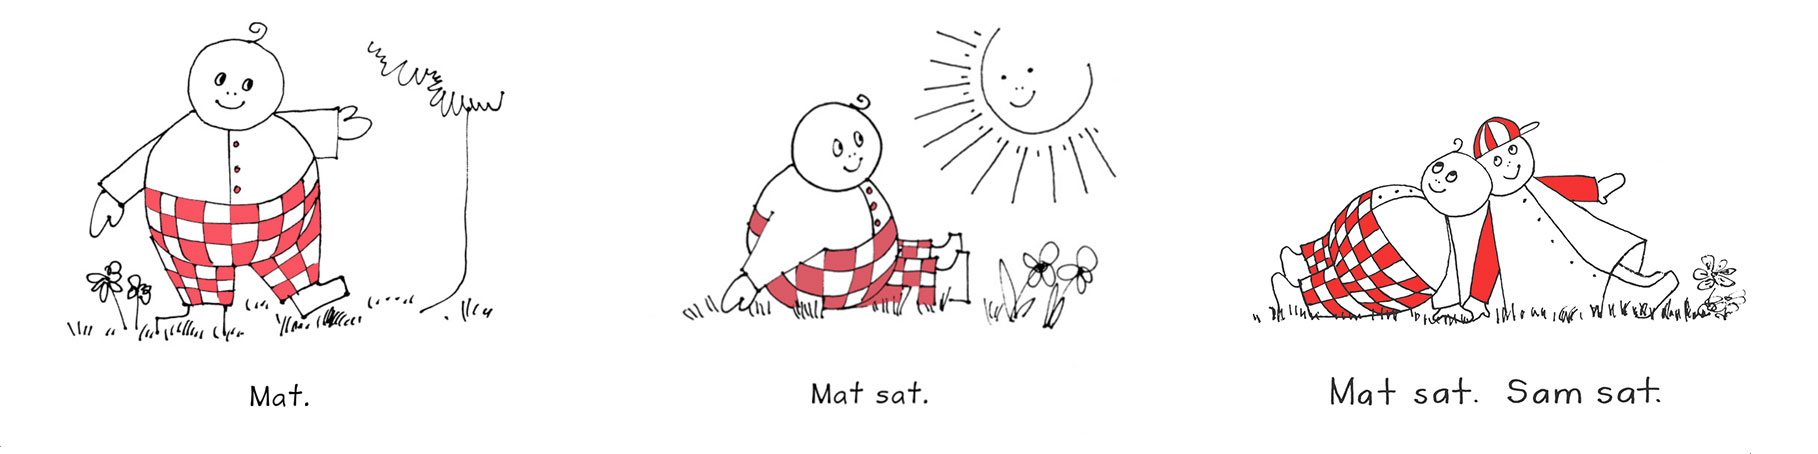 three pages from a Bob Book called Mat